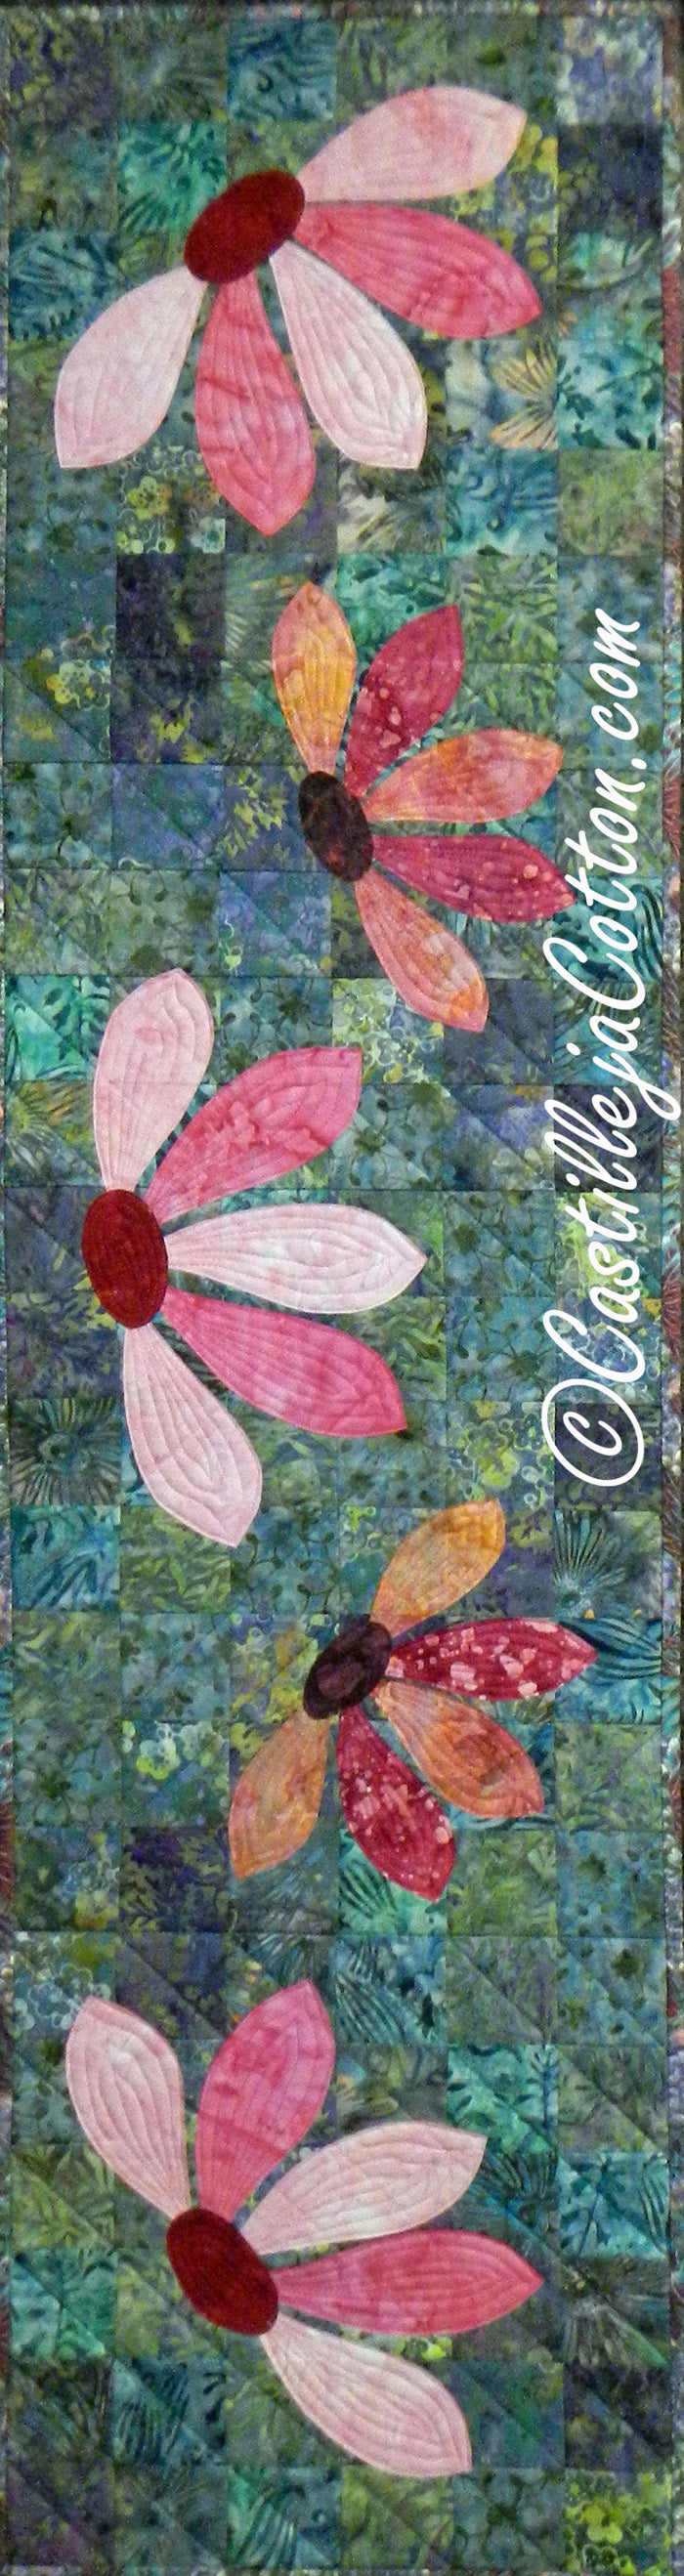 Blooming Table Runner CJC-4625e - Downloadable Pattern